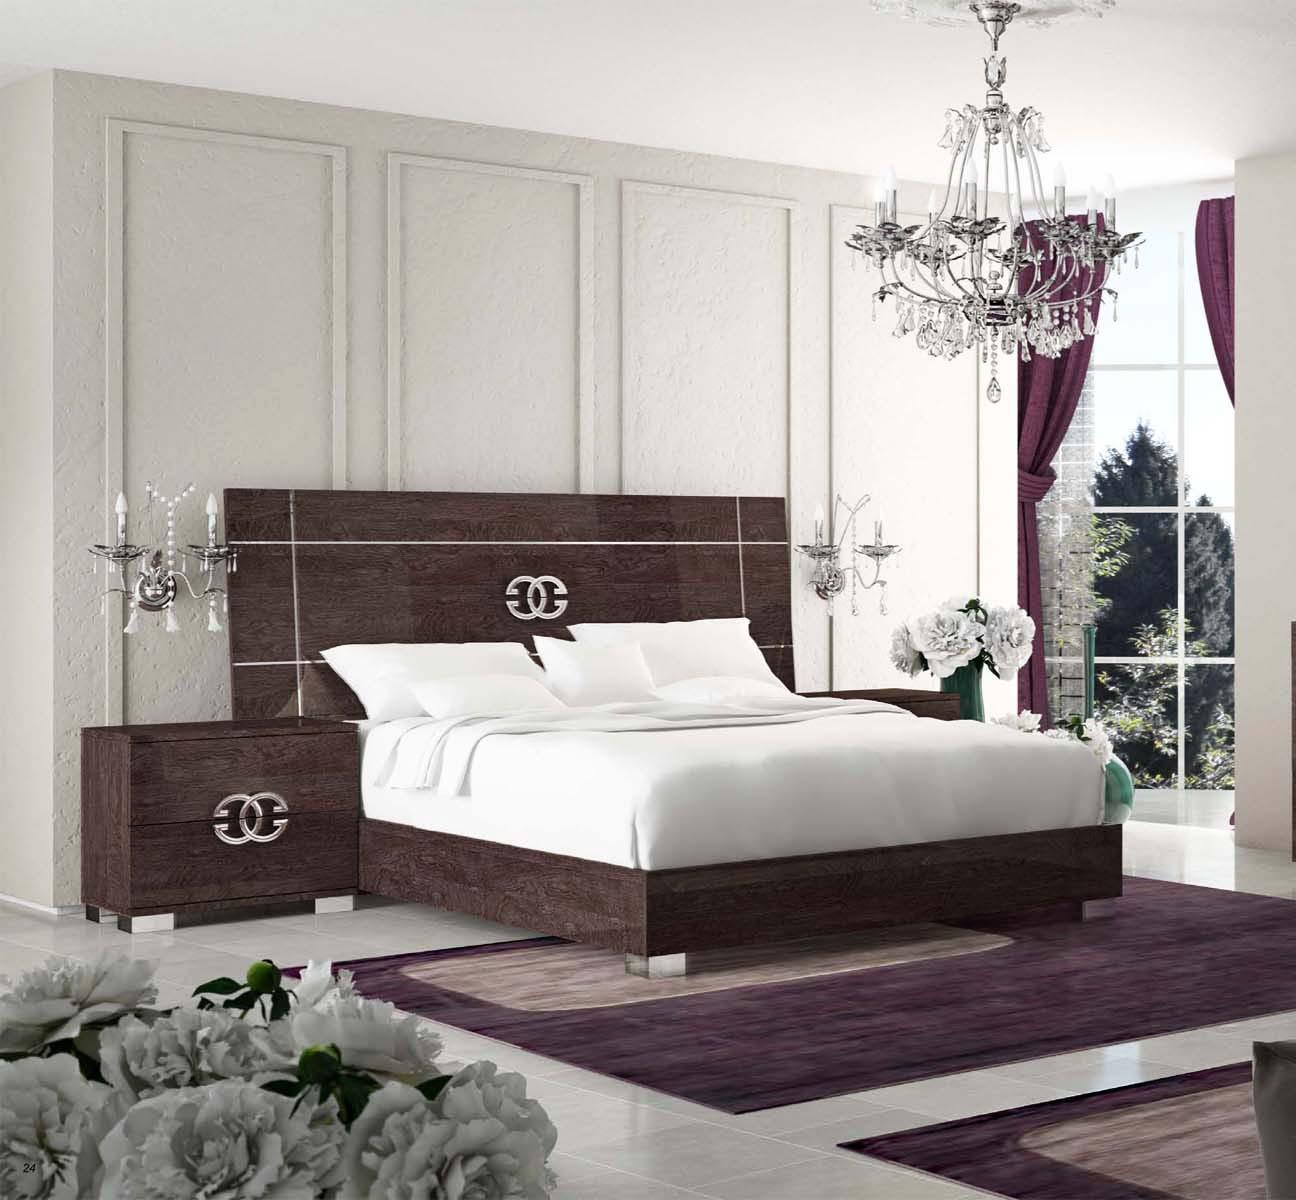 

    
Glossy Walnut Queen Bedroom Set 3Pcs Contemporary Made in Italy ESF Prestige CLASSIC
